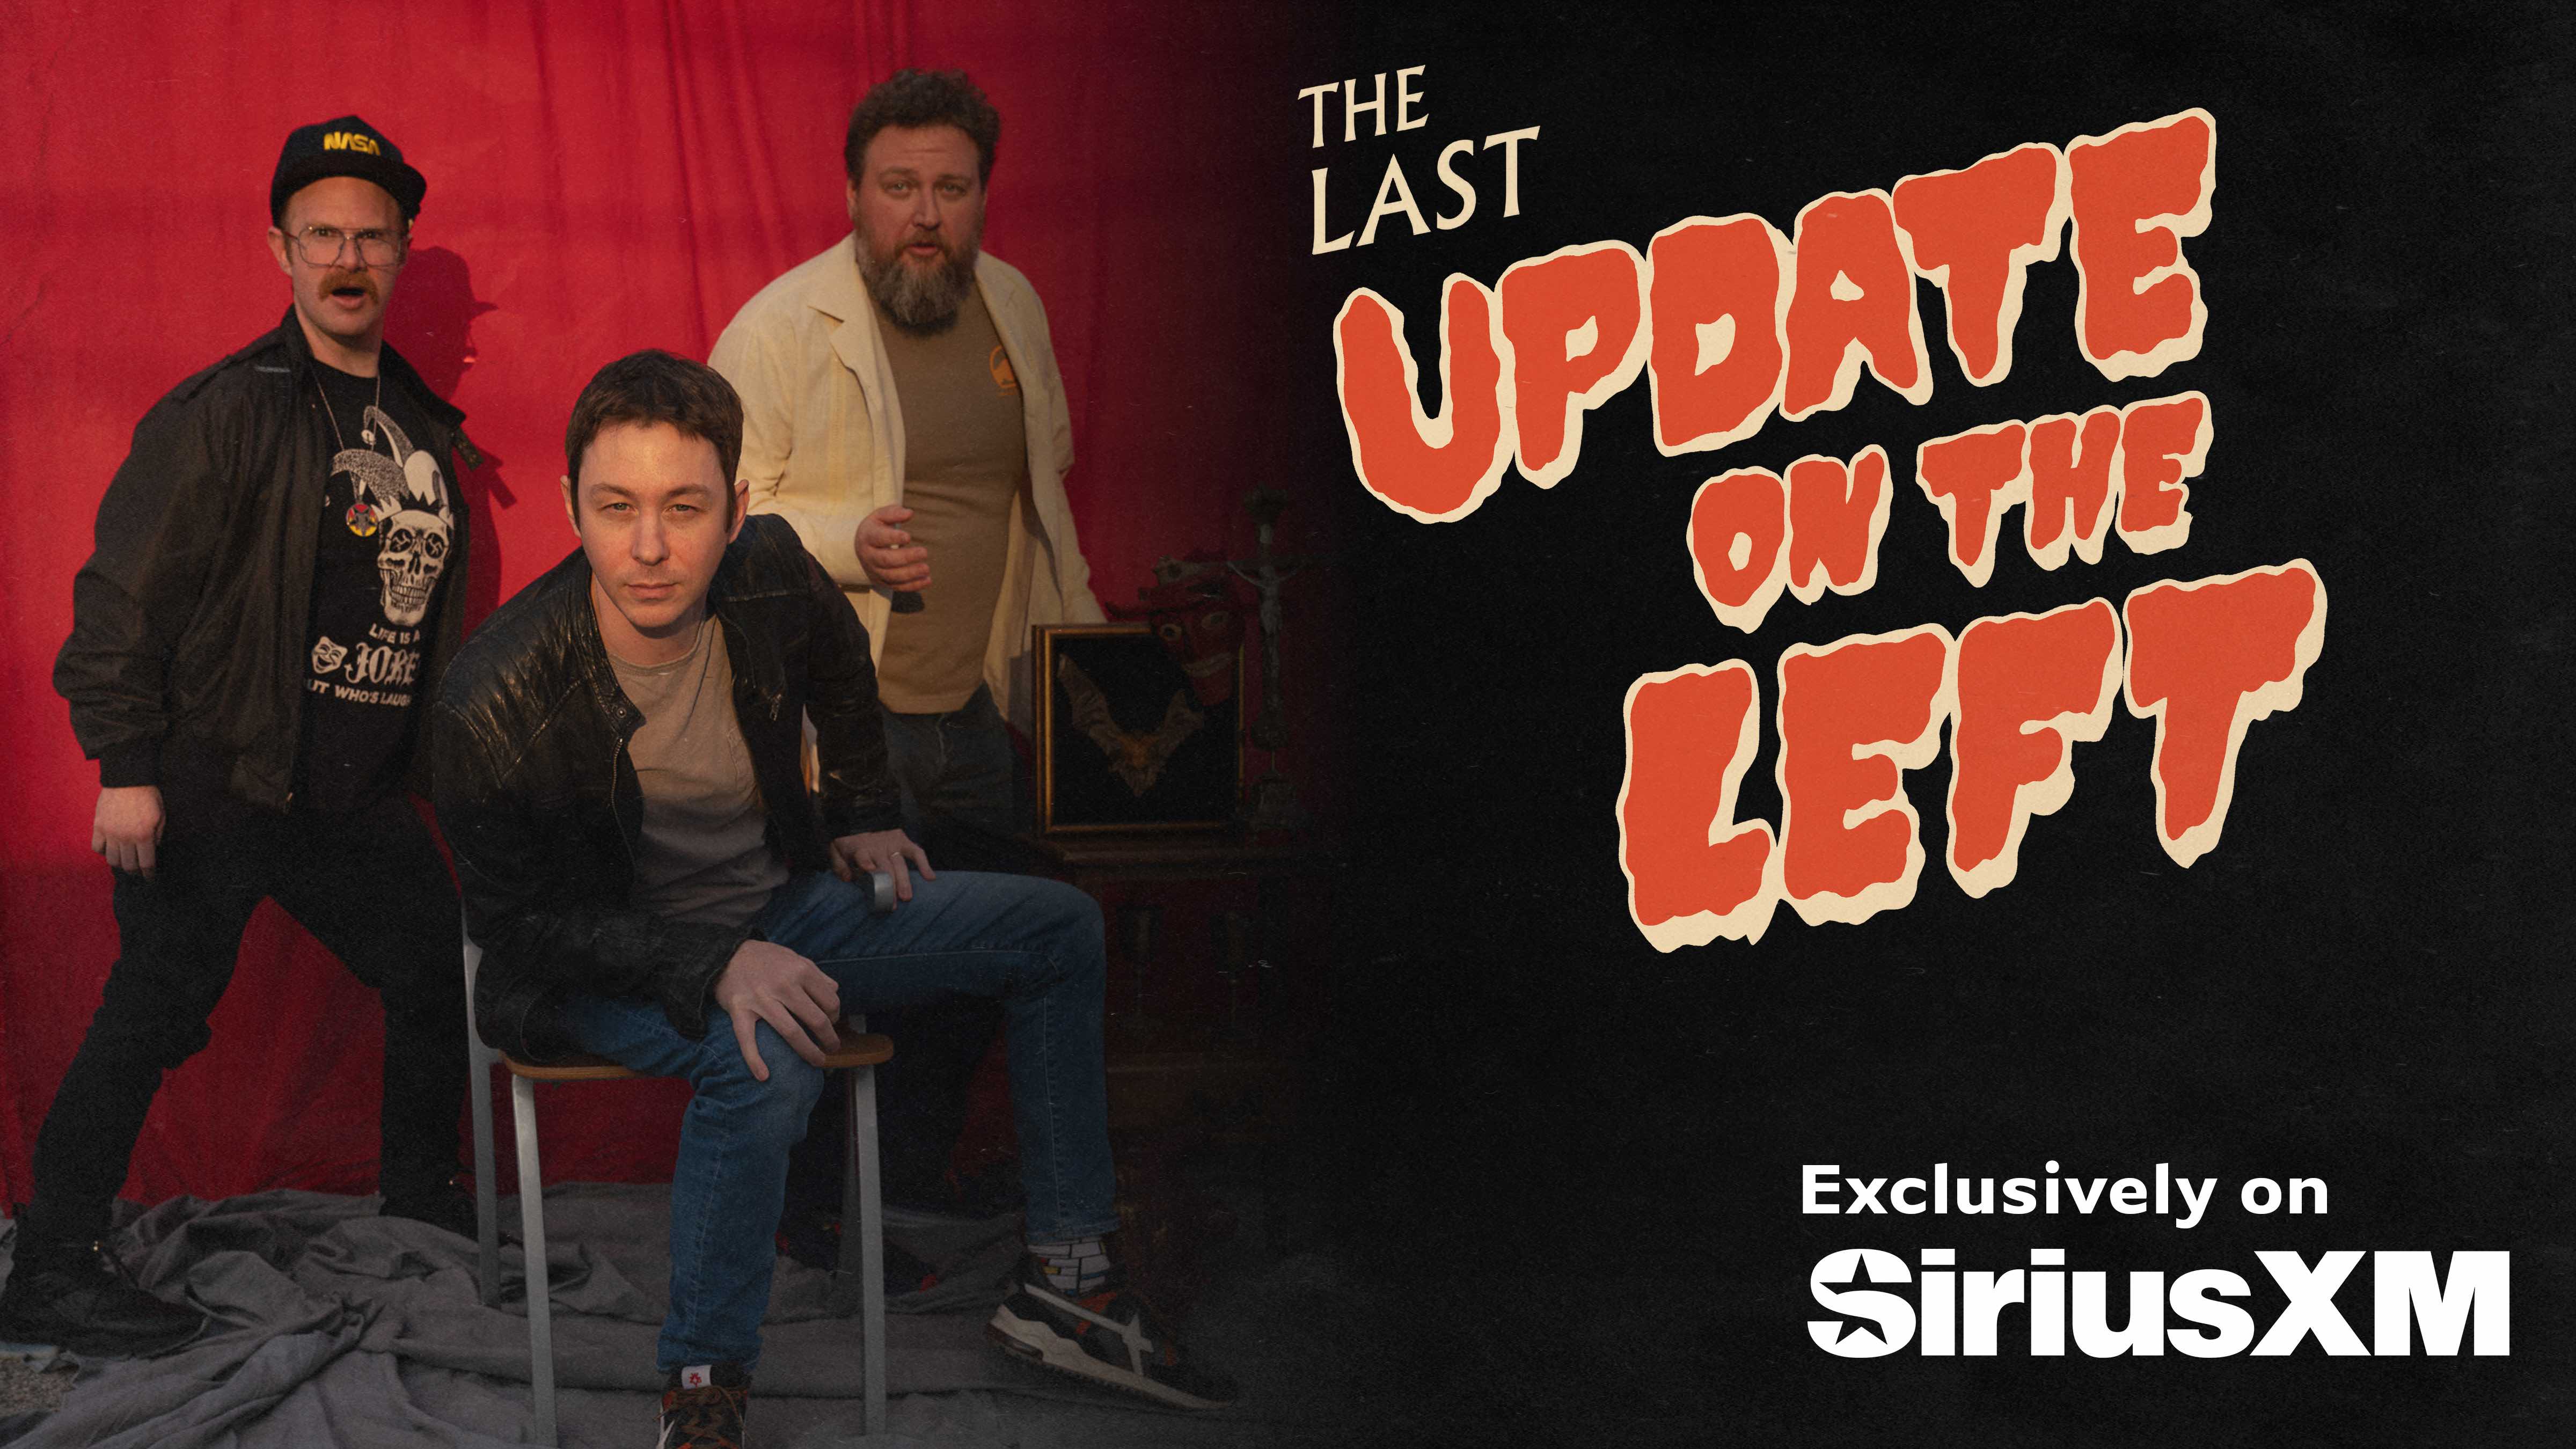 The Last Update On The Left - Exclusively on SiriusXM